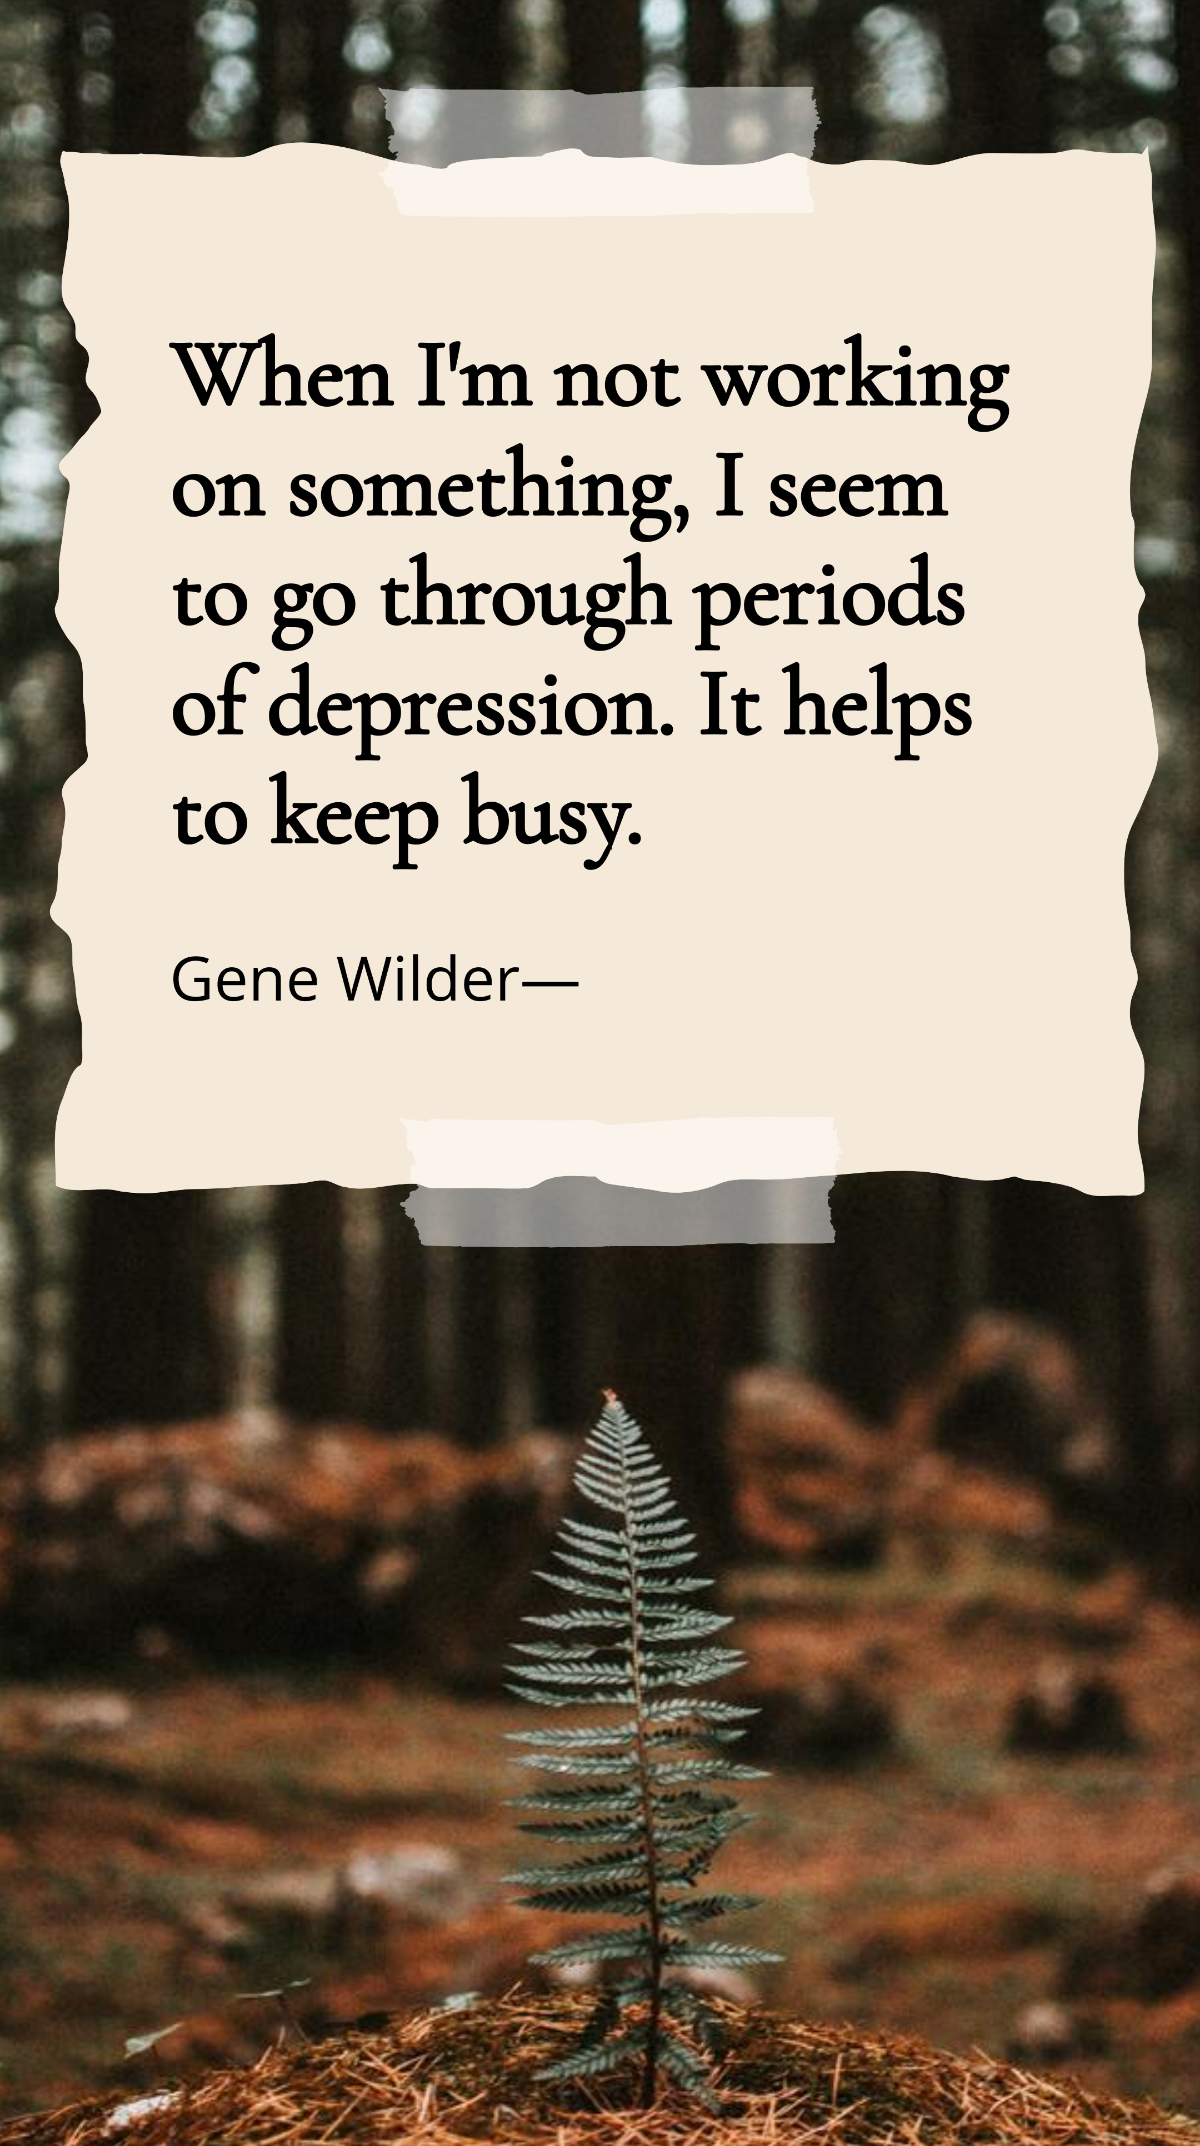 Gene Wilder - When I'm not working on something, I seem to go through periods of depression. It helps to keep busy. Template